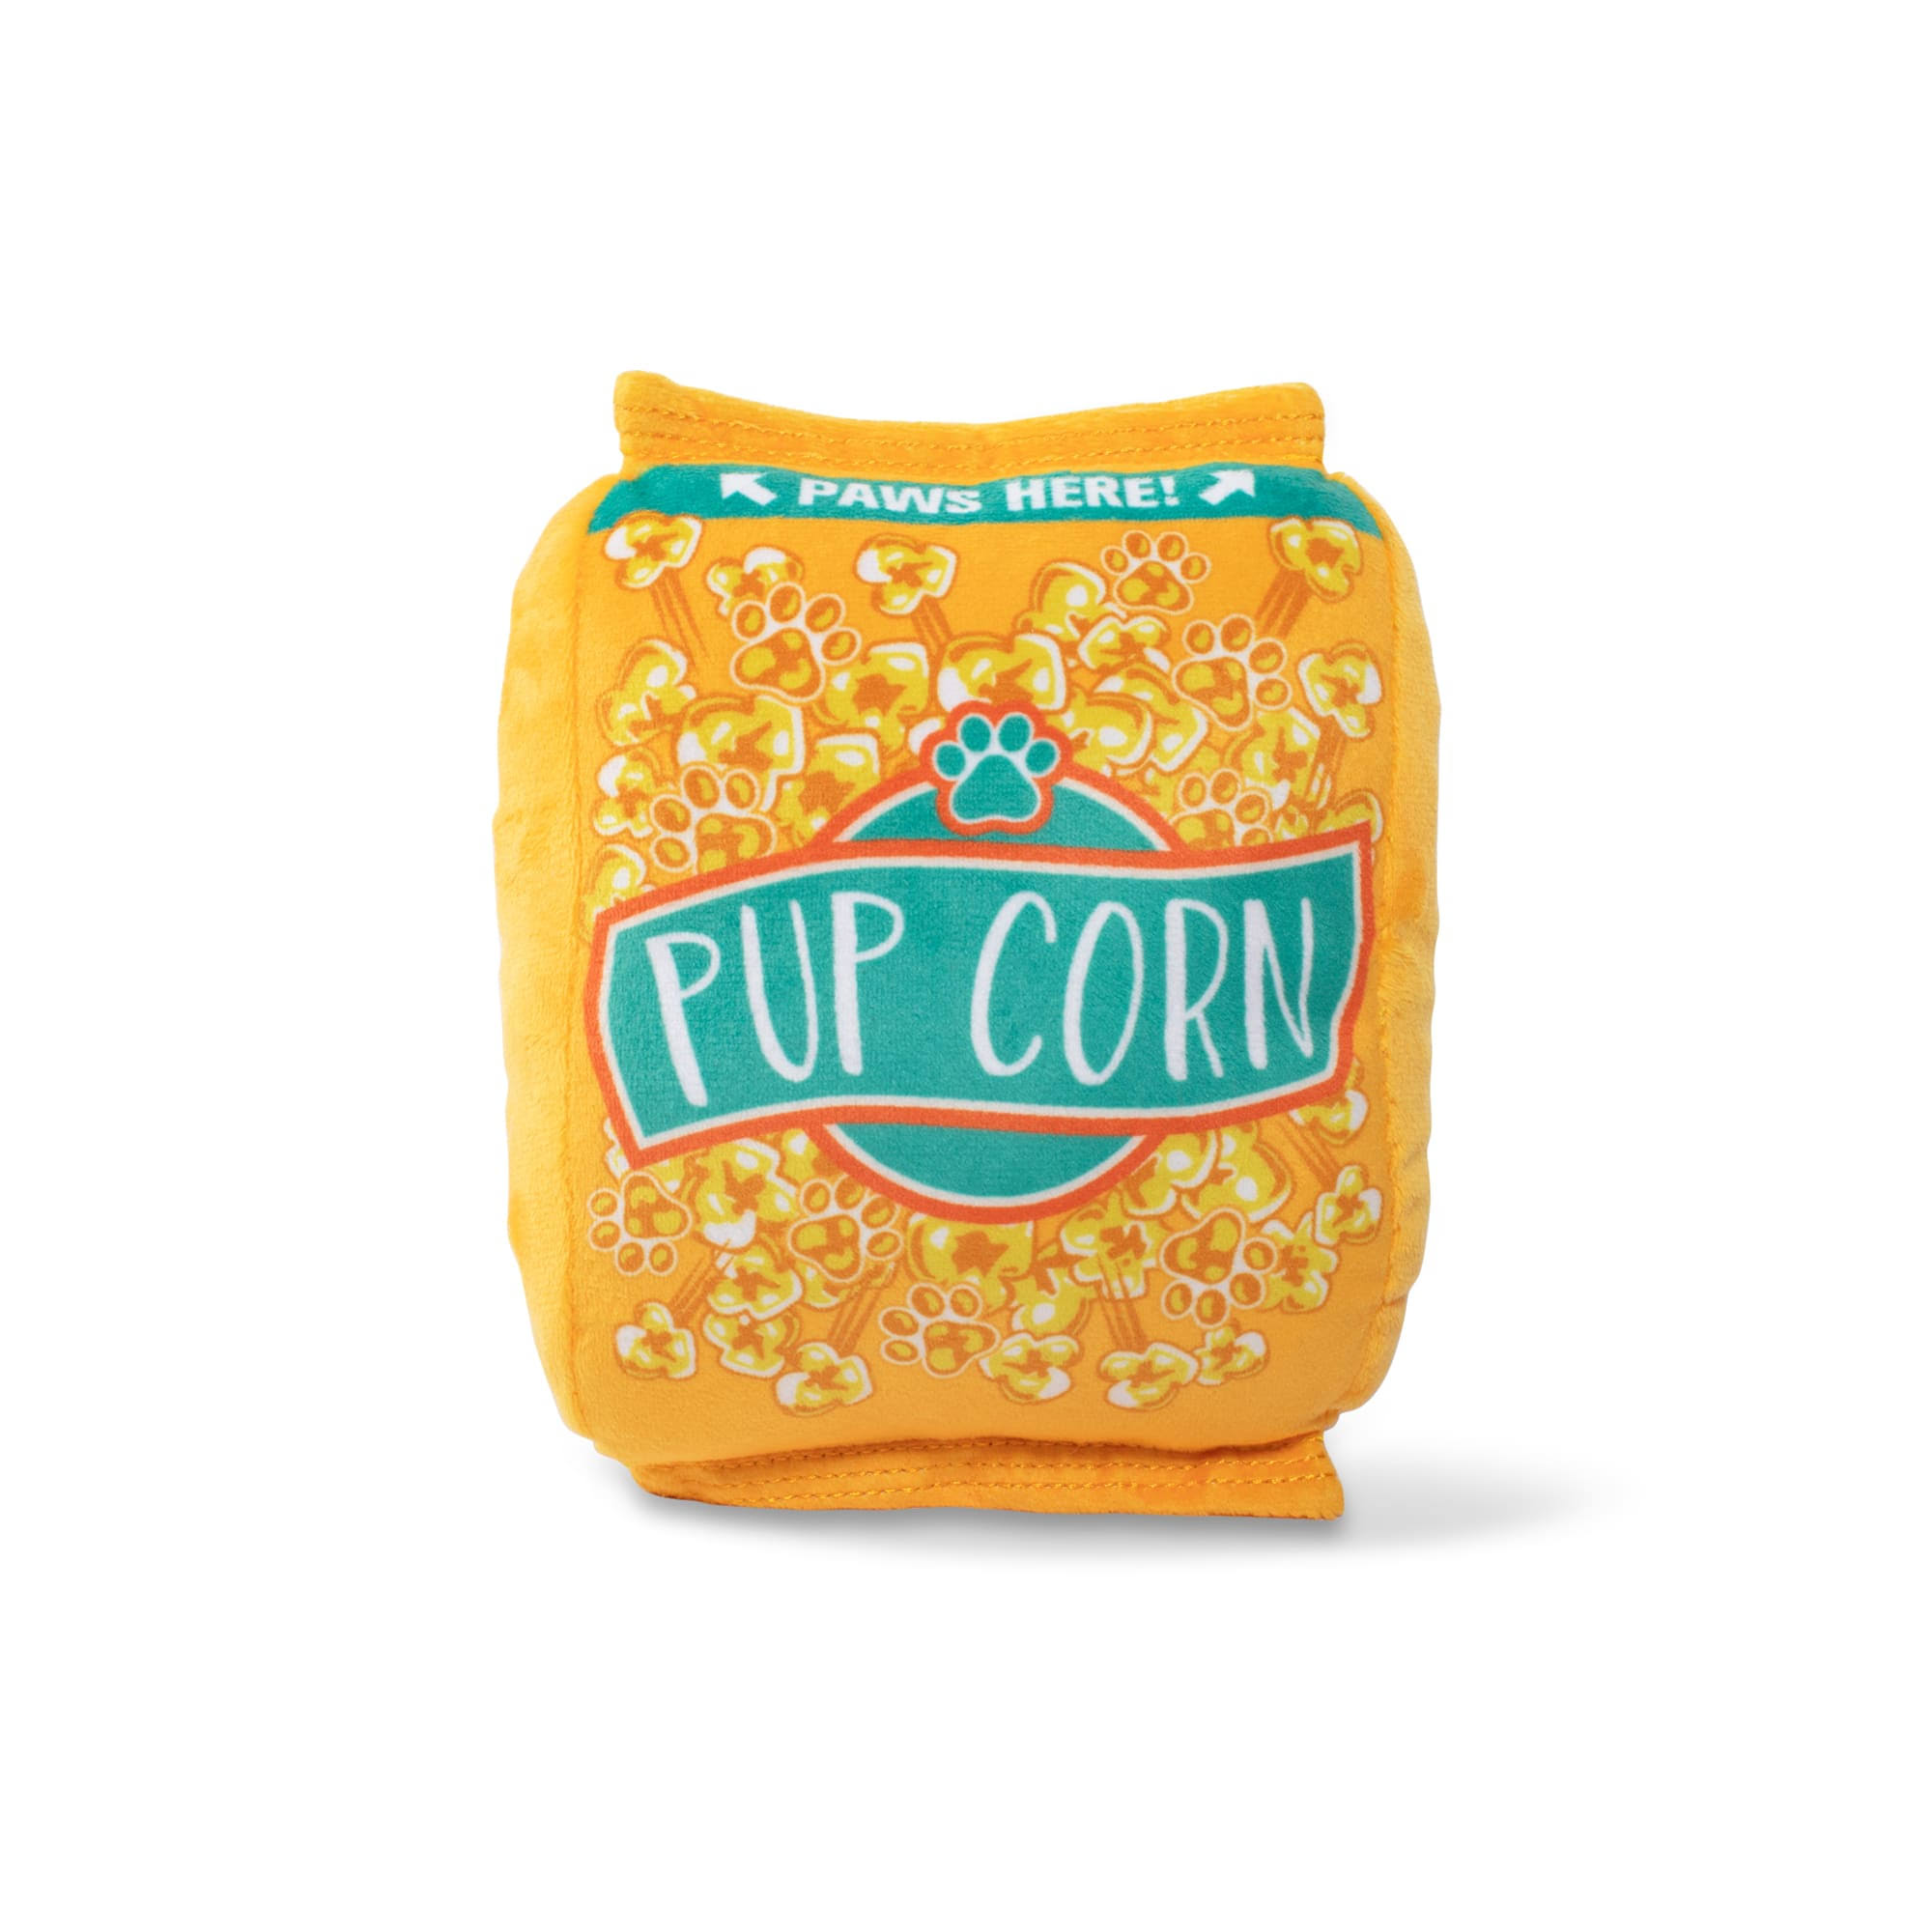 Wagsdale Pup Corn Microwave Bag Plush Dog Toy, Small